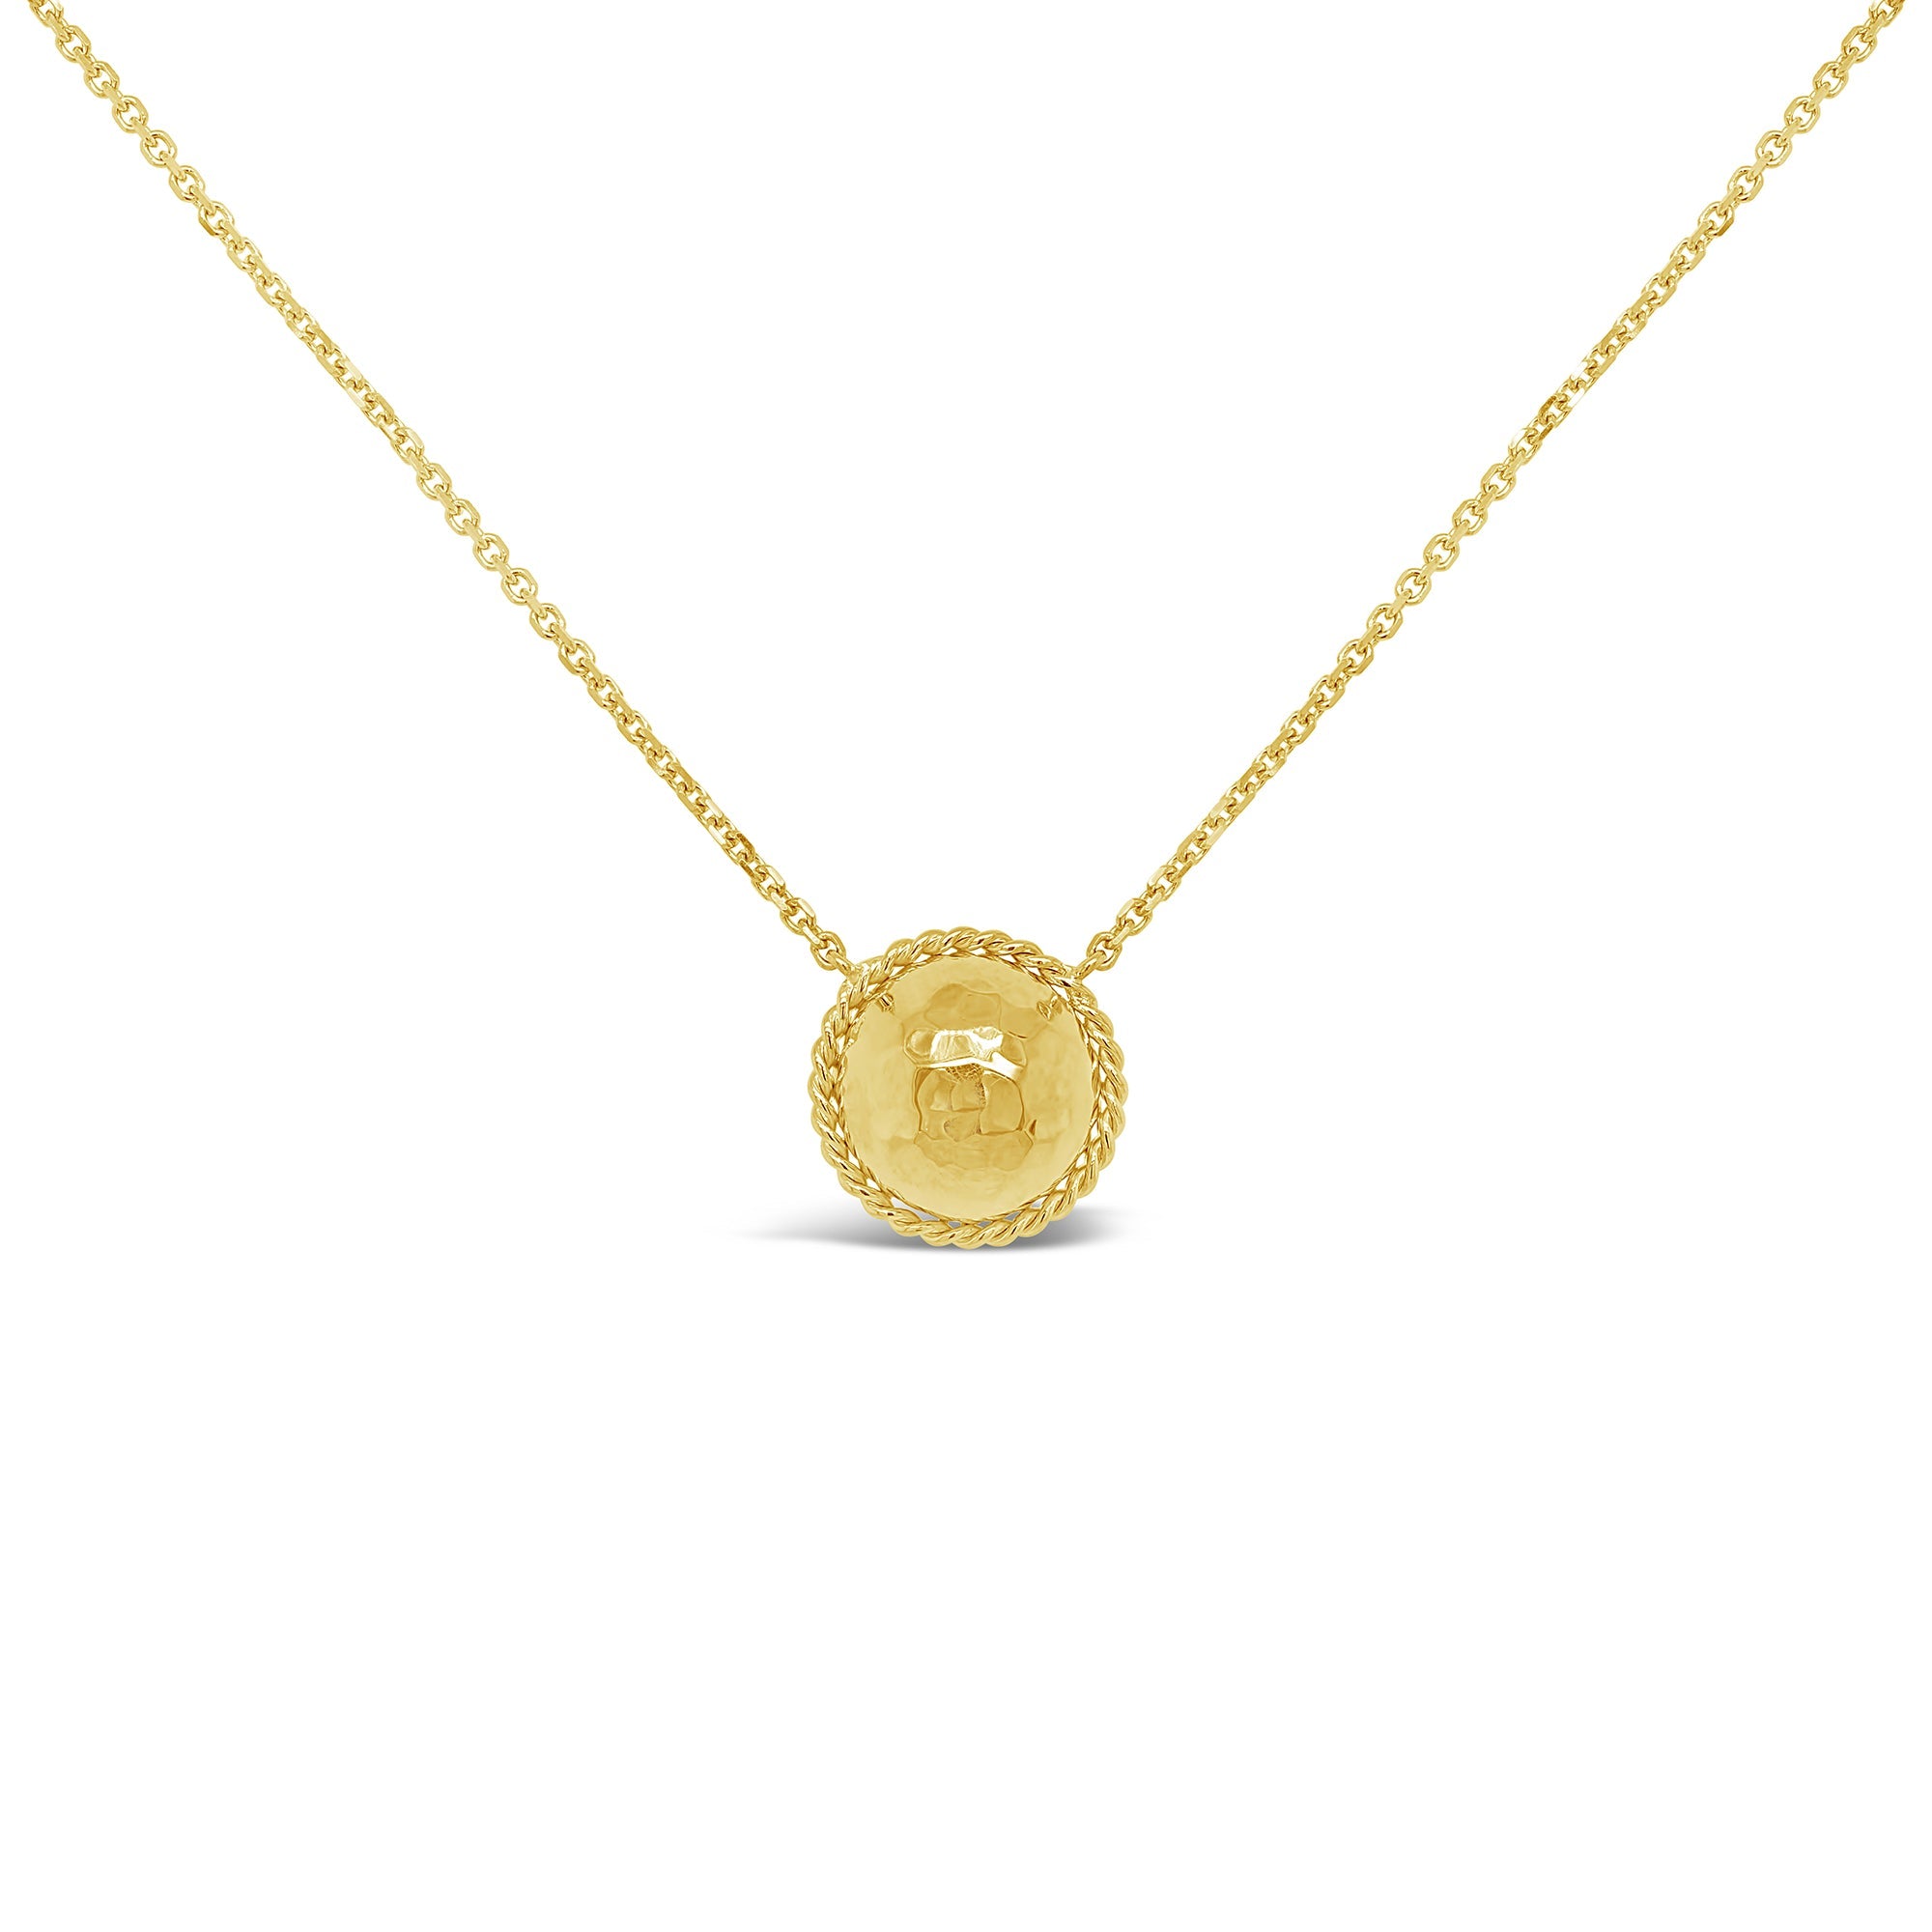 Hammered Dome & Twist 18ct Yellow Gold Necklace